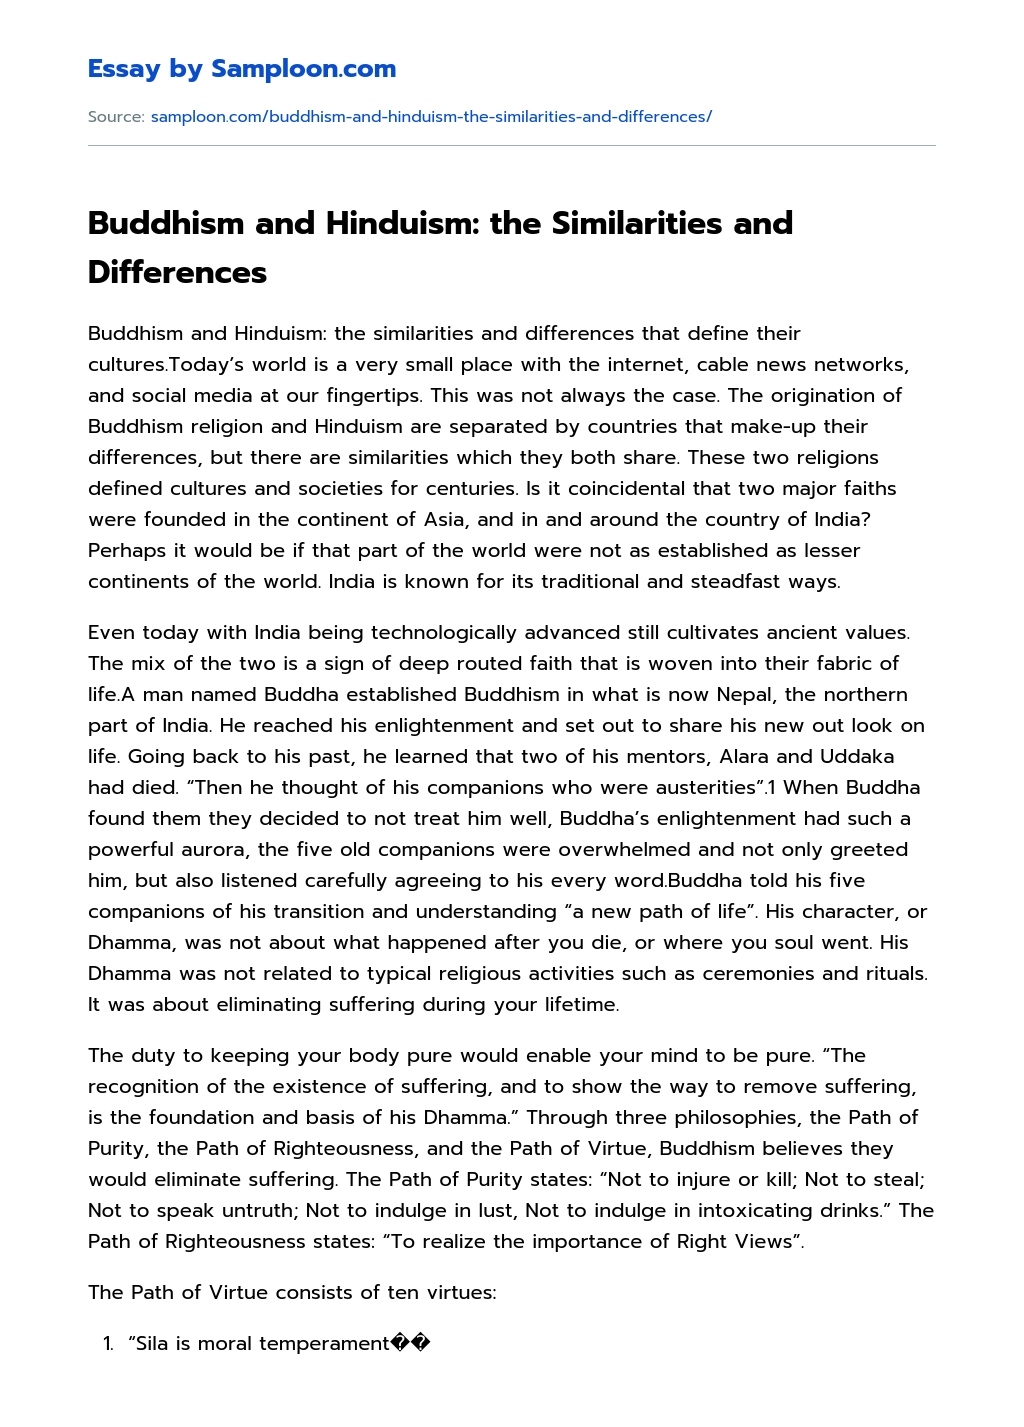 Buddhism and Hinduism: the Similarities and Differences essay